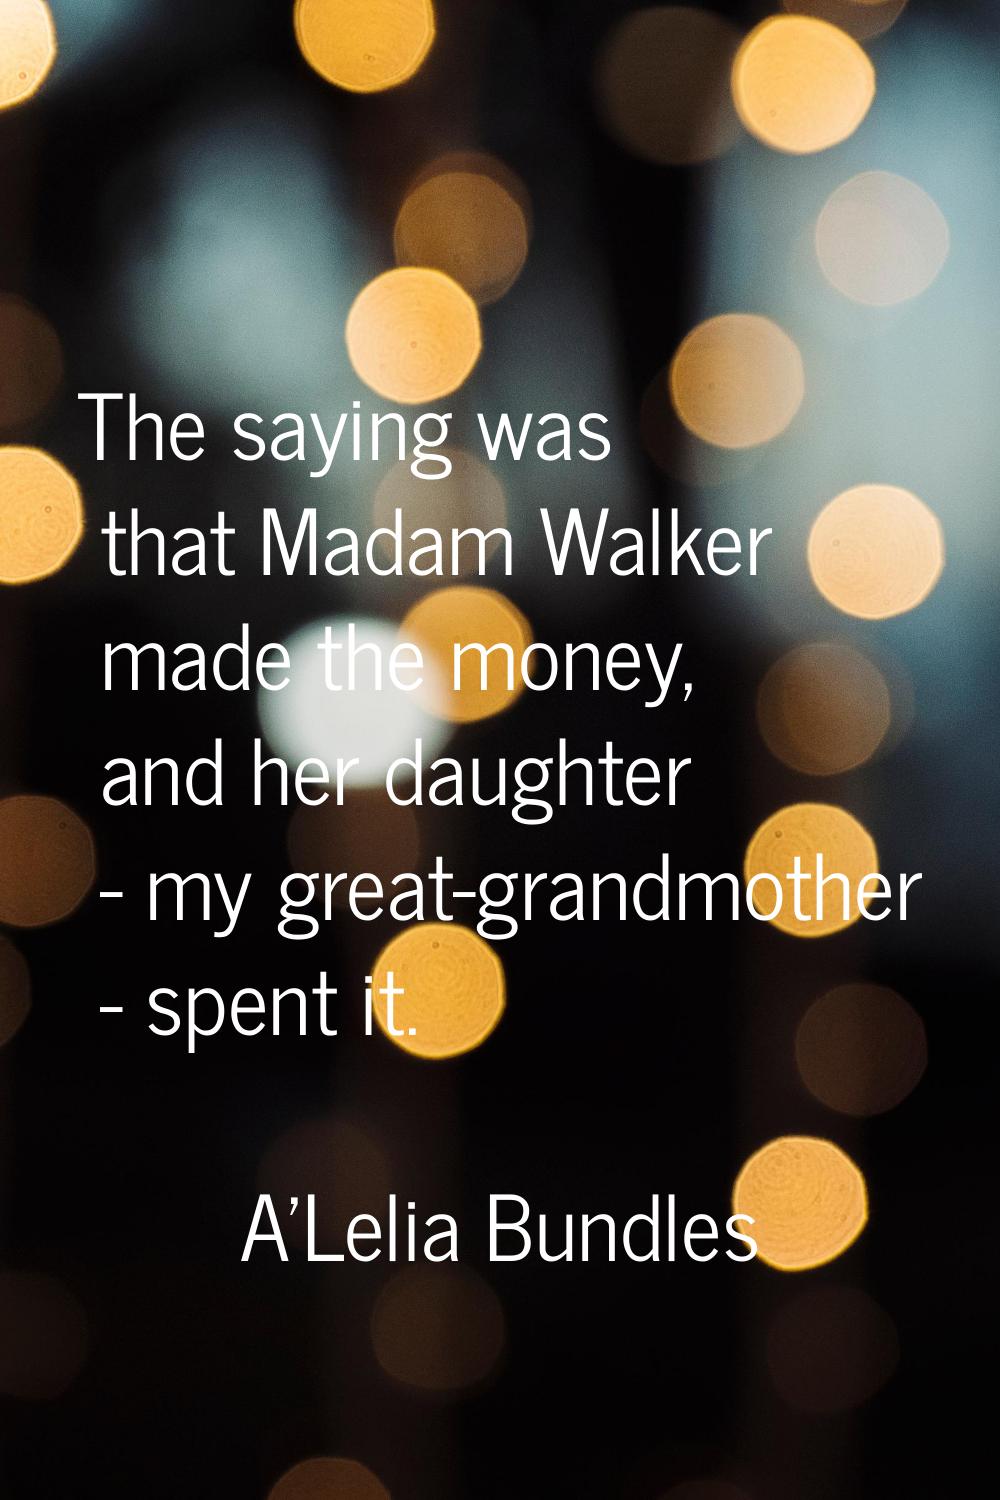 The saying was that Madam Walker made the money, and her daughter - my great-grandmother - spent it